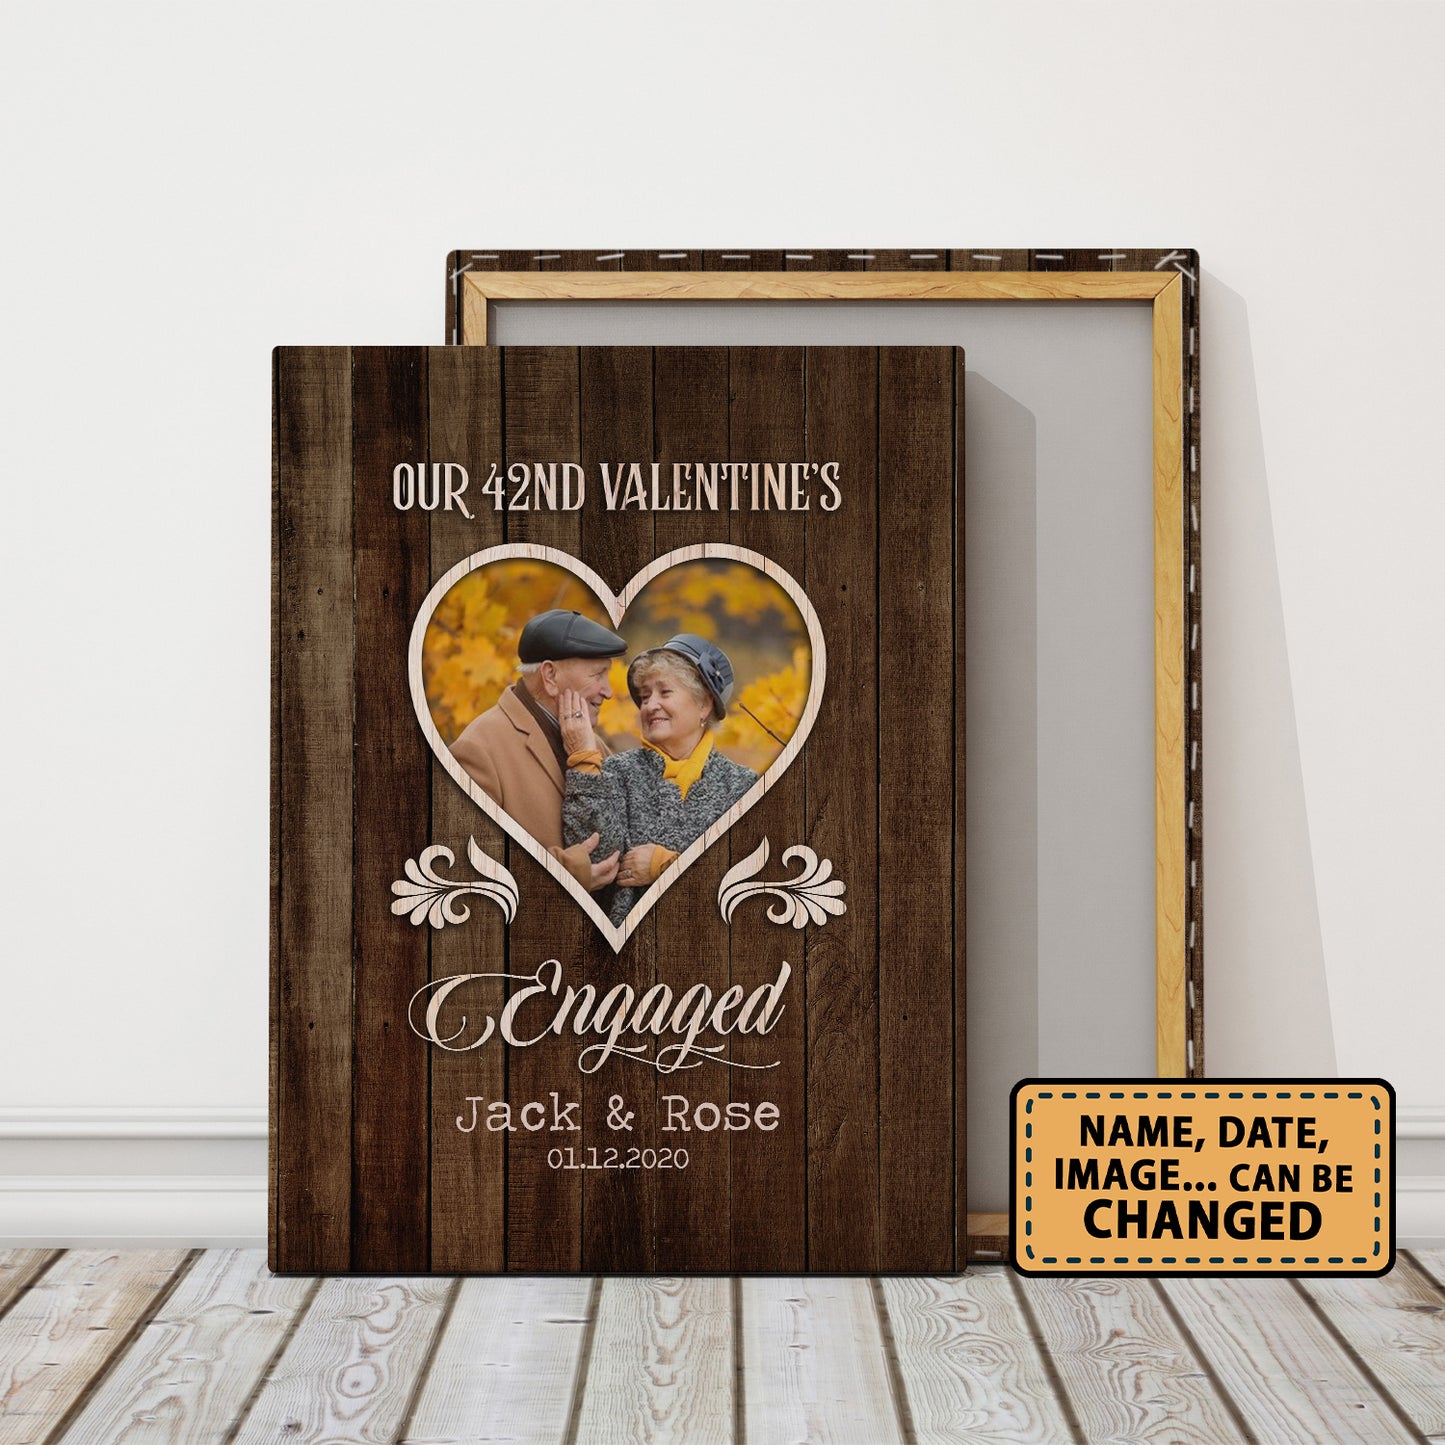 Our 42nd Valentine’s Day Engaged Custom Image Anniversary Canvas